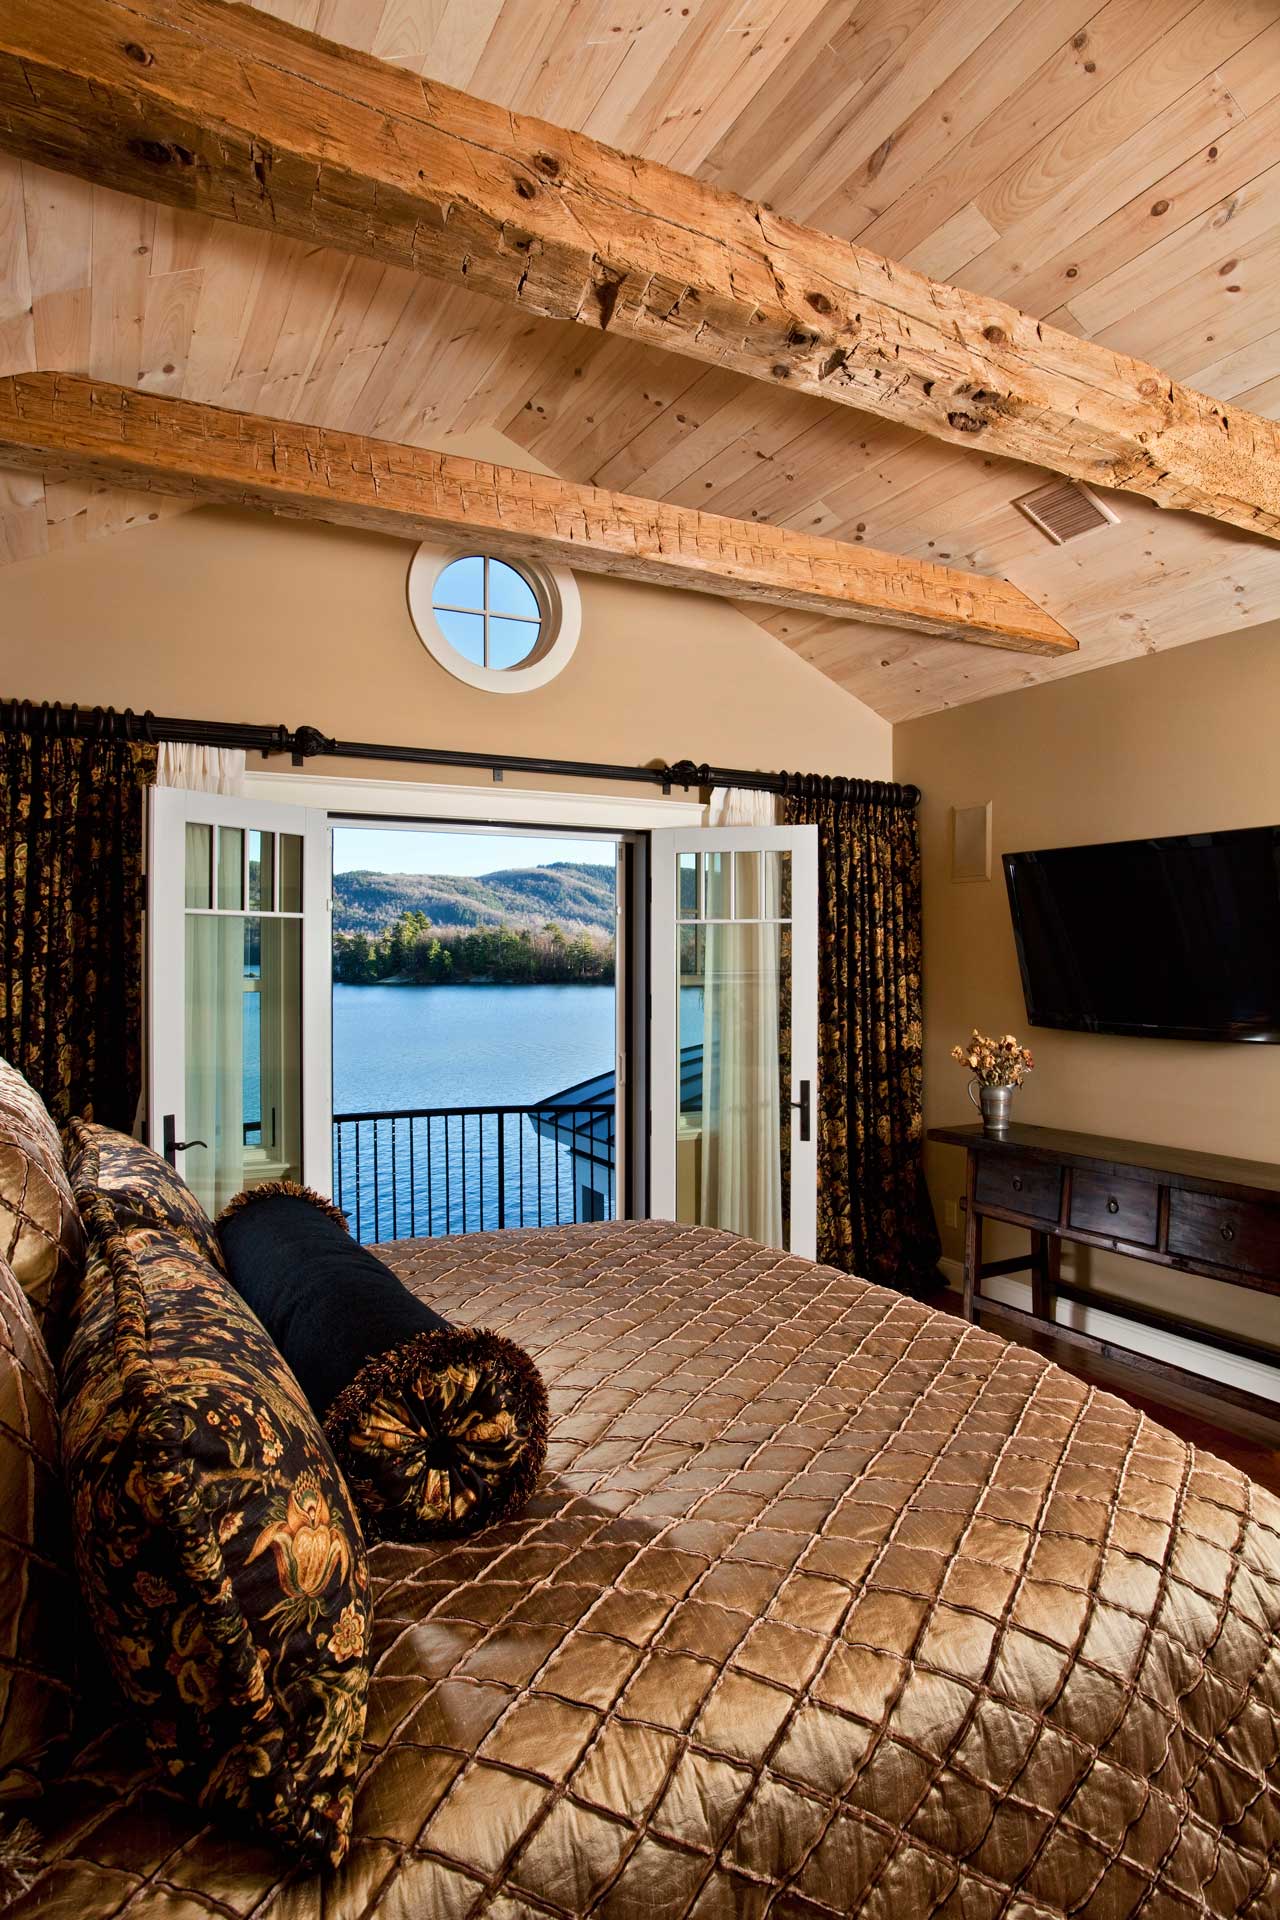 Photo of Brauner project, bedroom with lake view through open french doors and exposed wooden beams